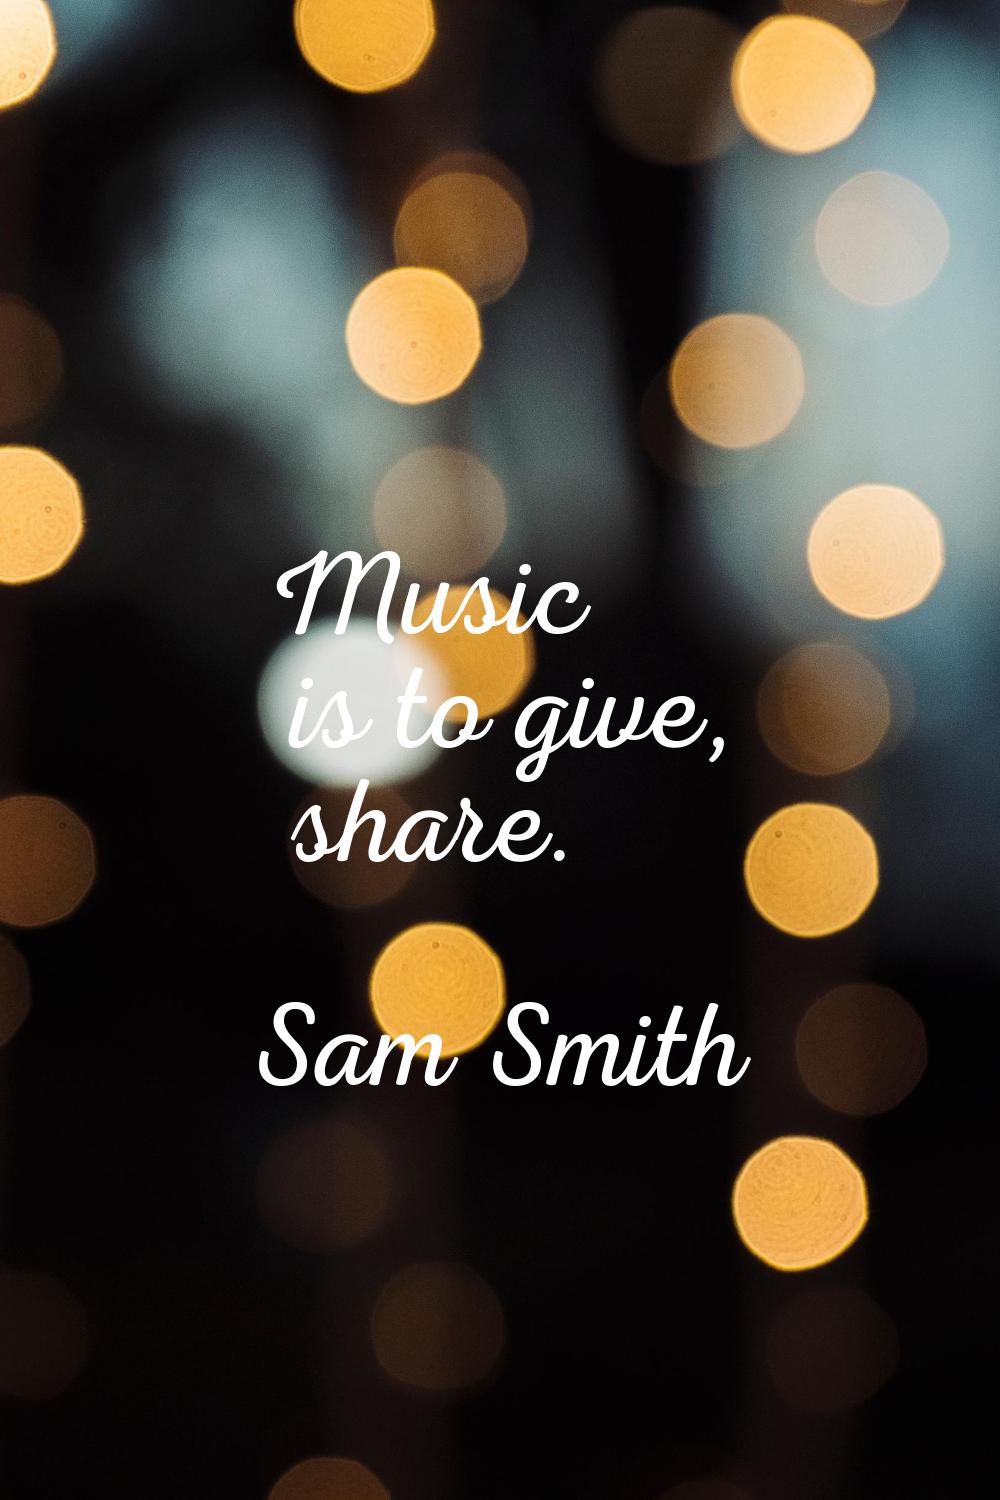 Music is to give, share.